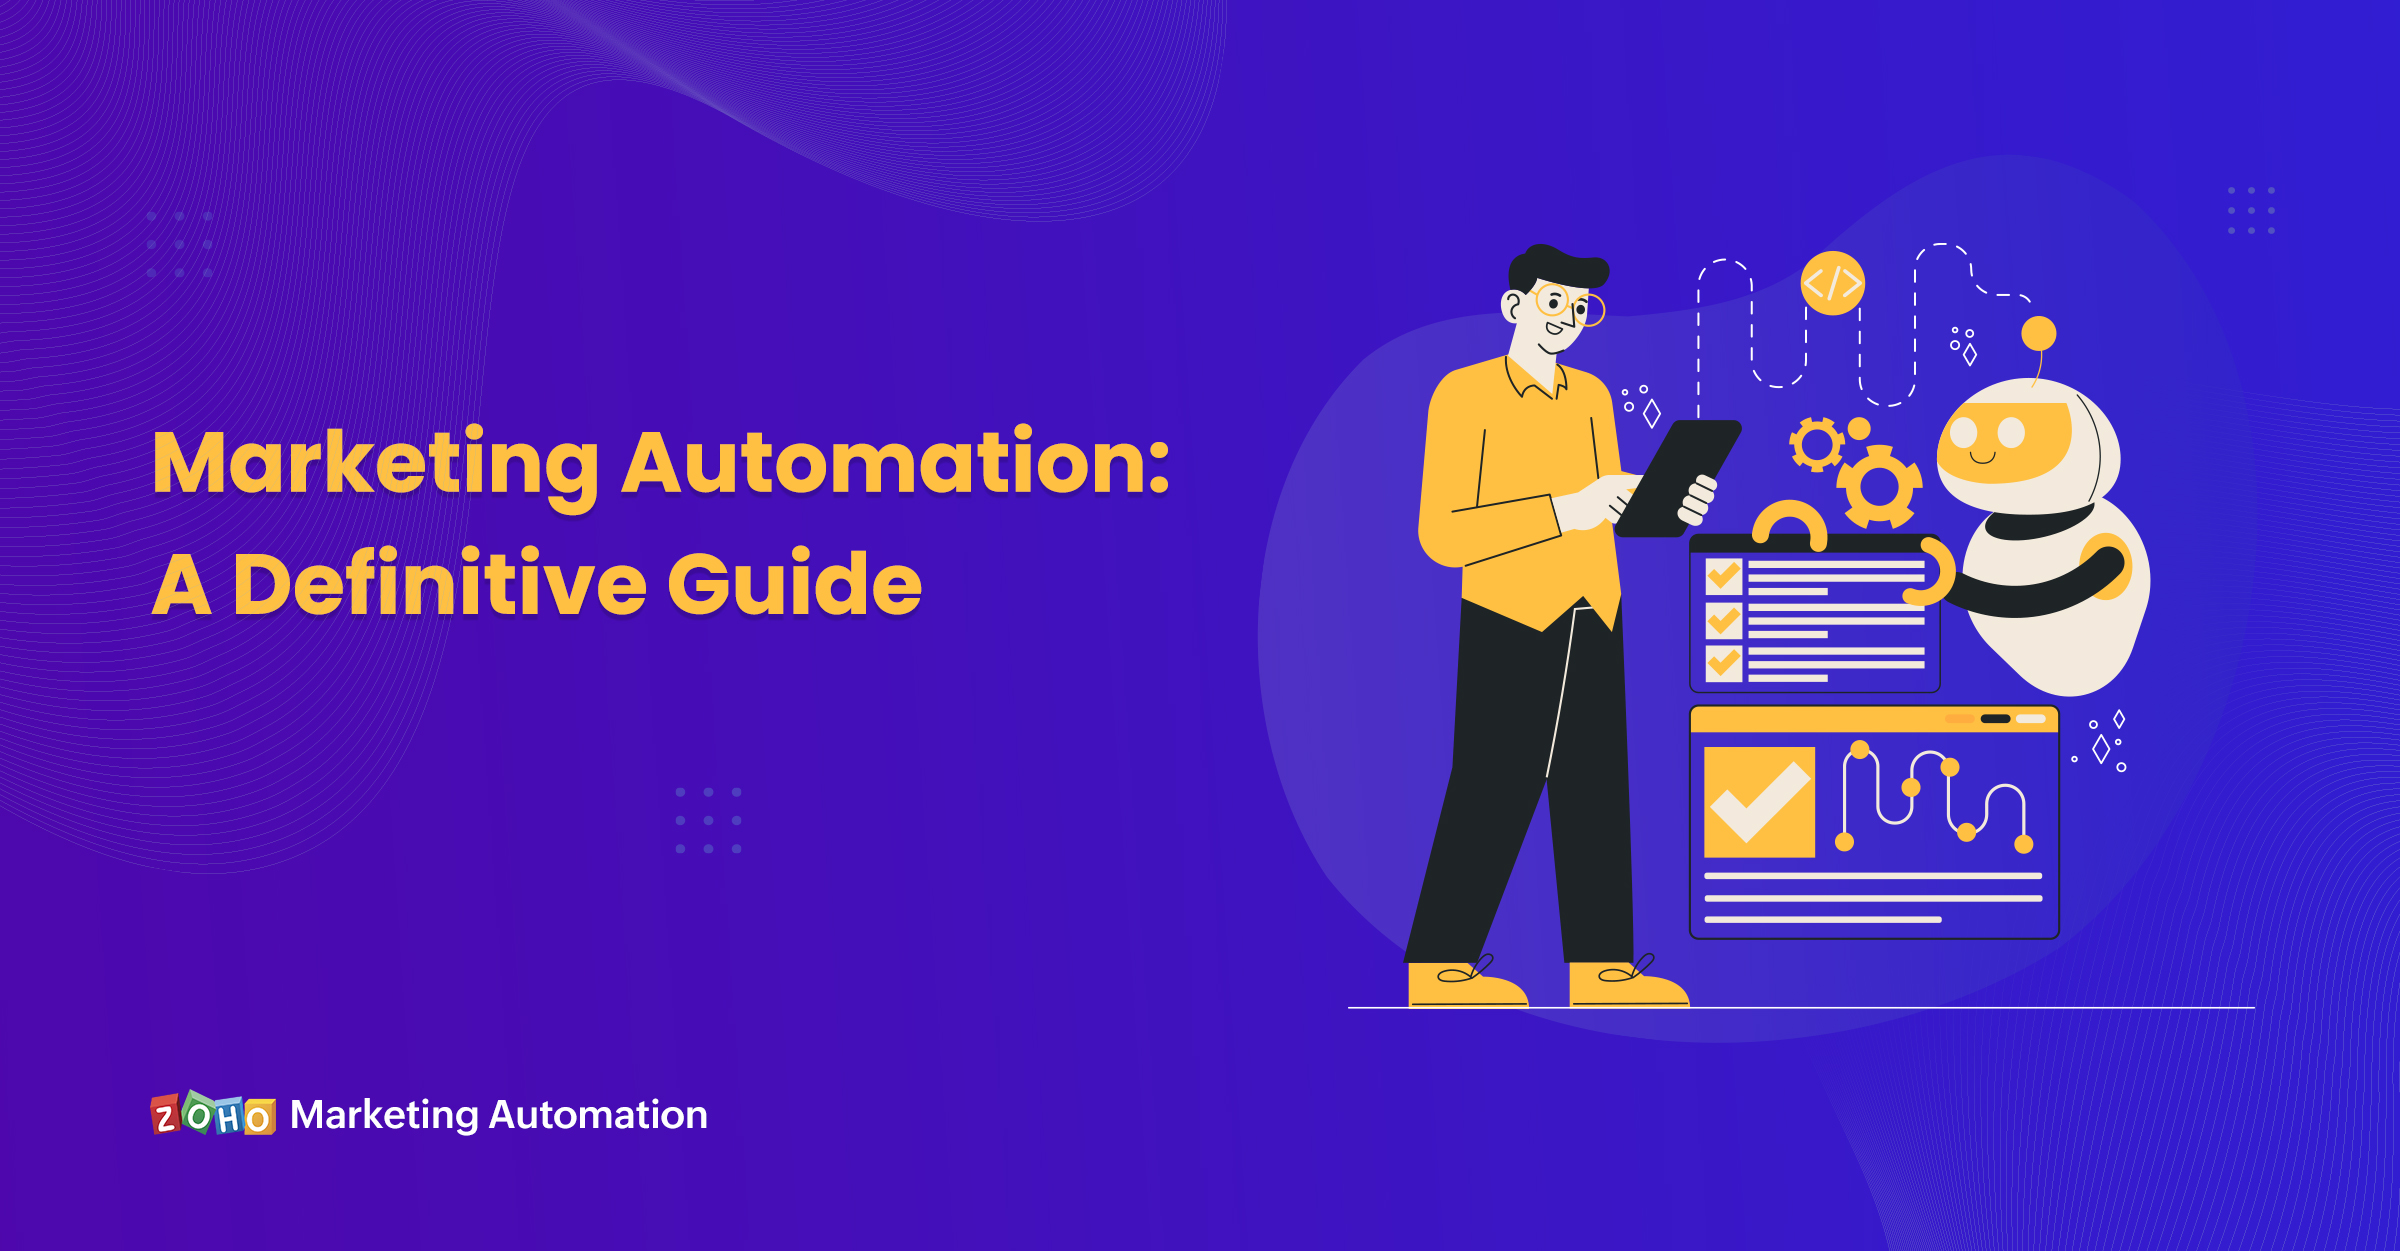 A guide to marketing automation